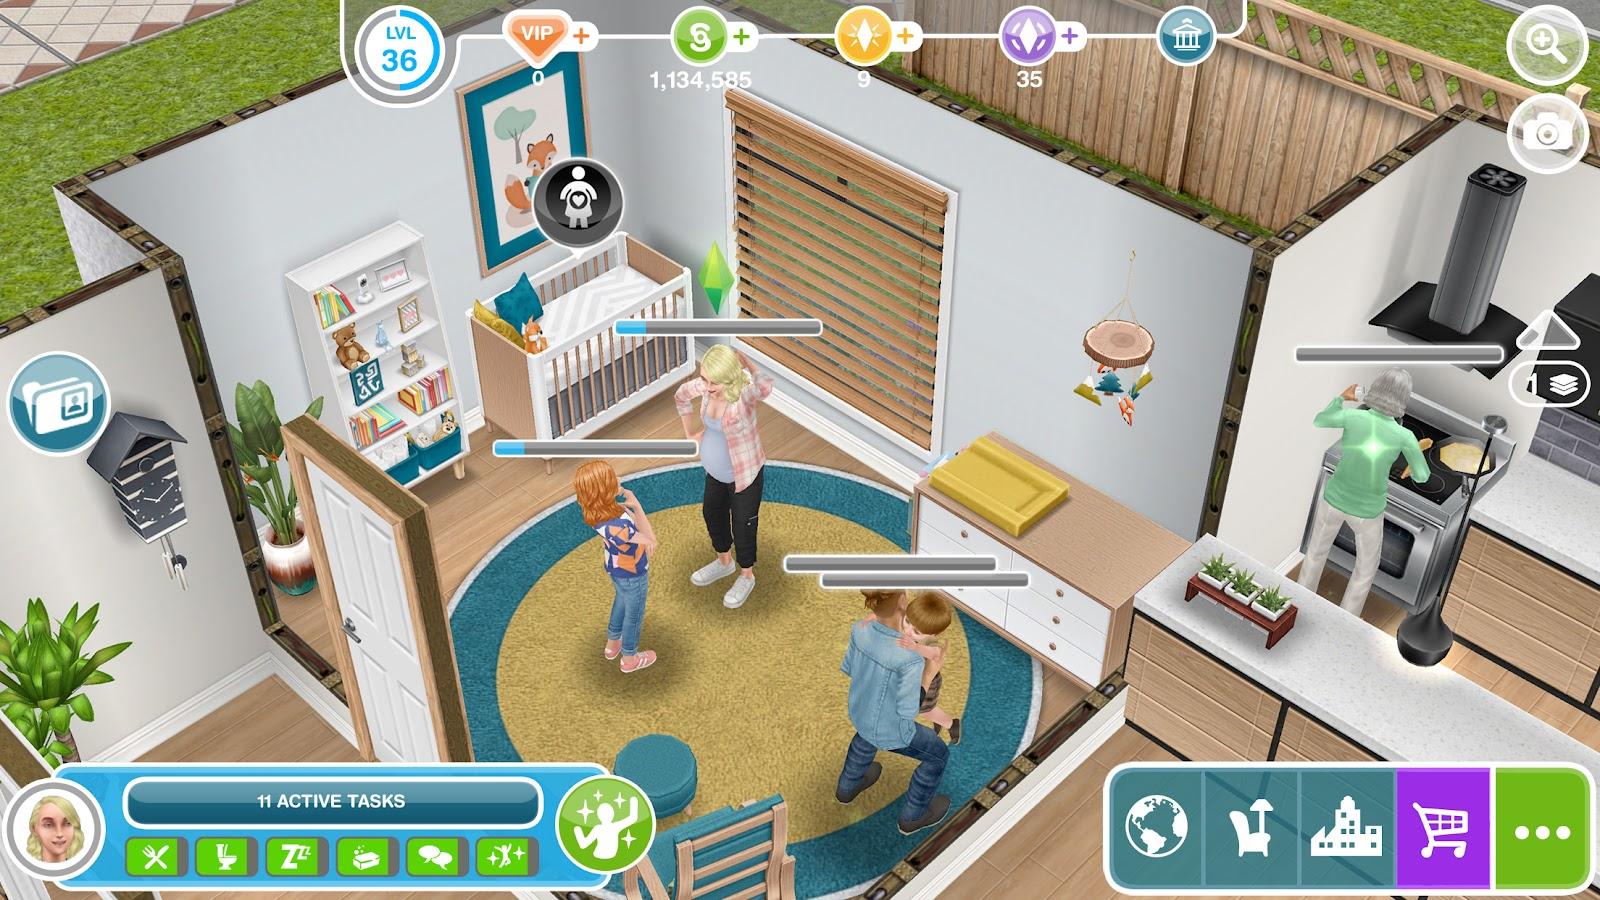 sims free online no download